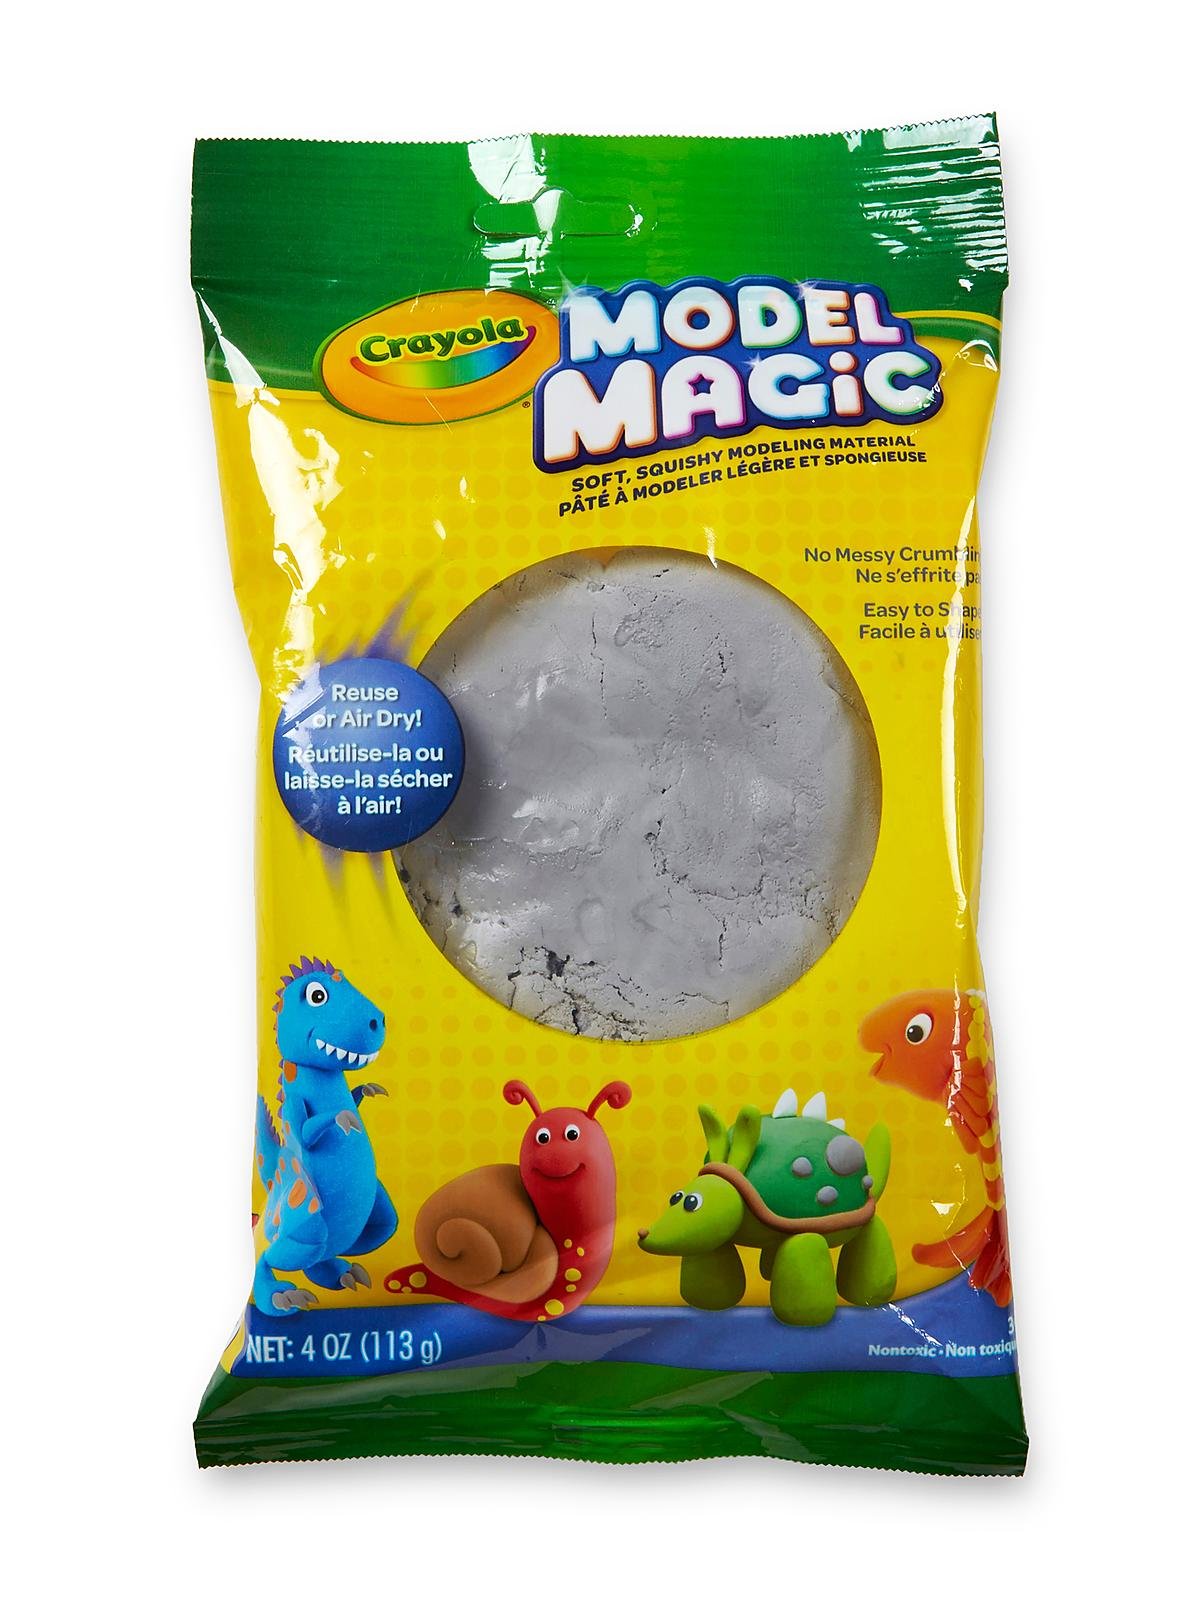 Crayola 2 lbs Model Magic Modeling Compound, Natural